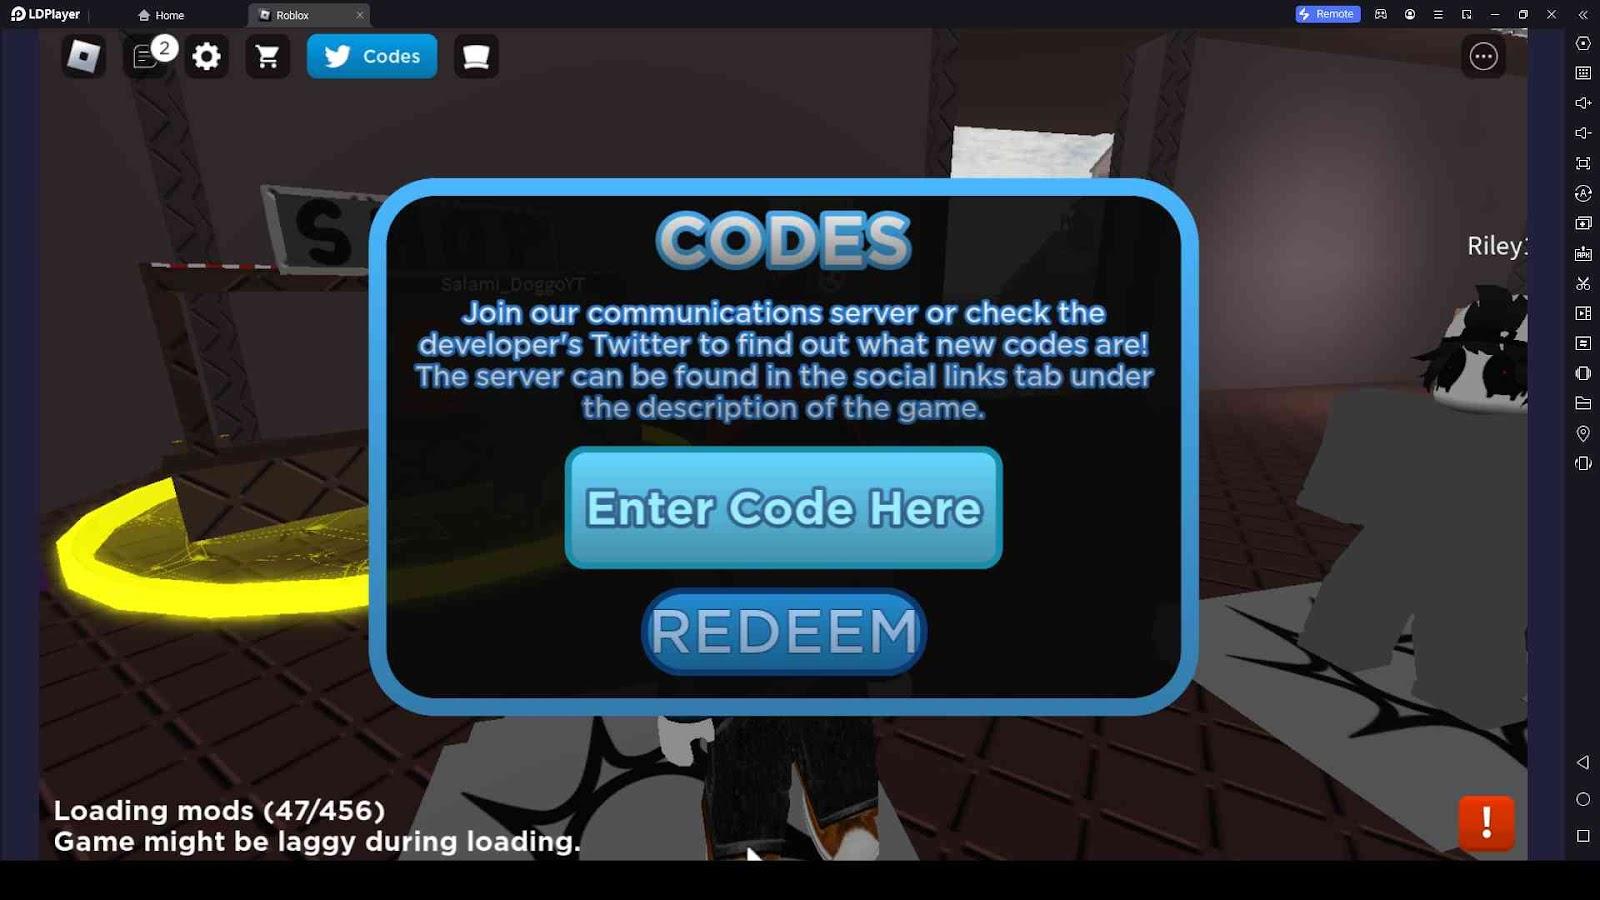 Roblox Friday Night Bloxxin Codes (December 2022)